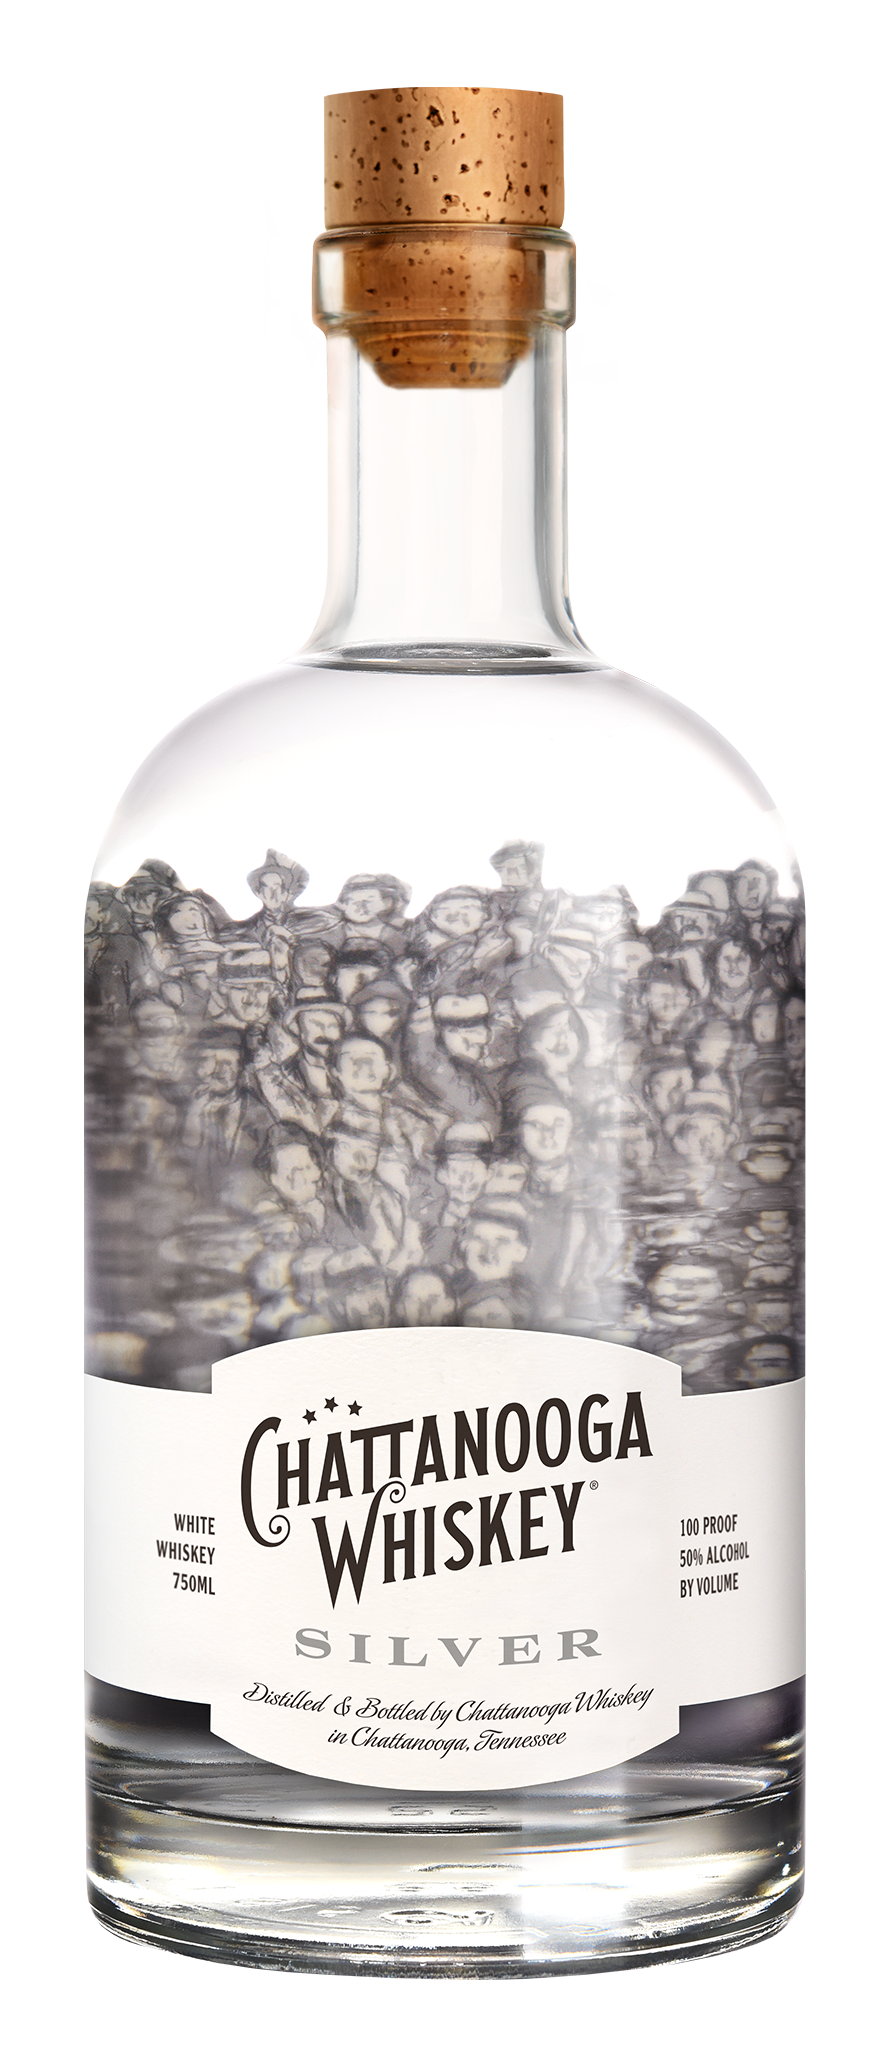 Chattanooga Whiskey Silver